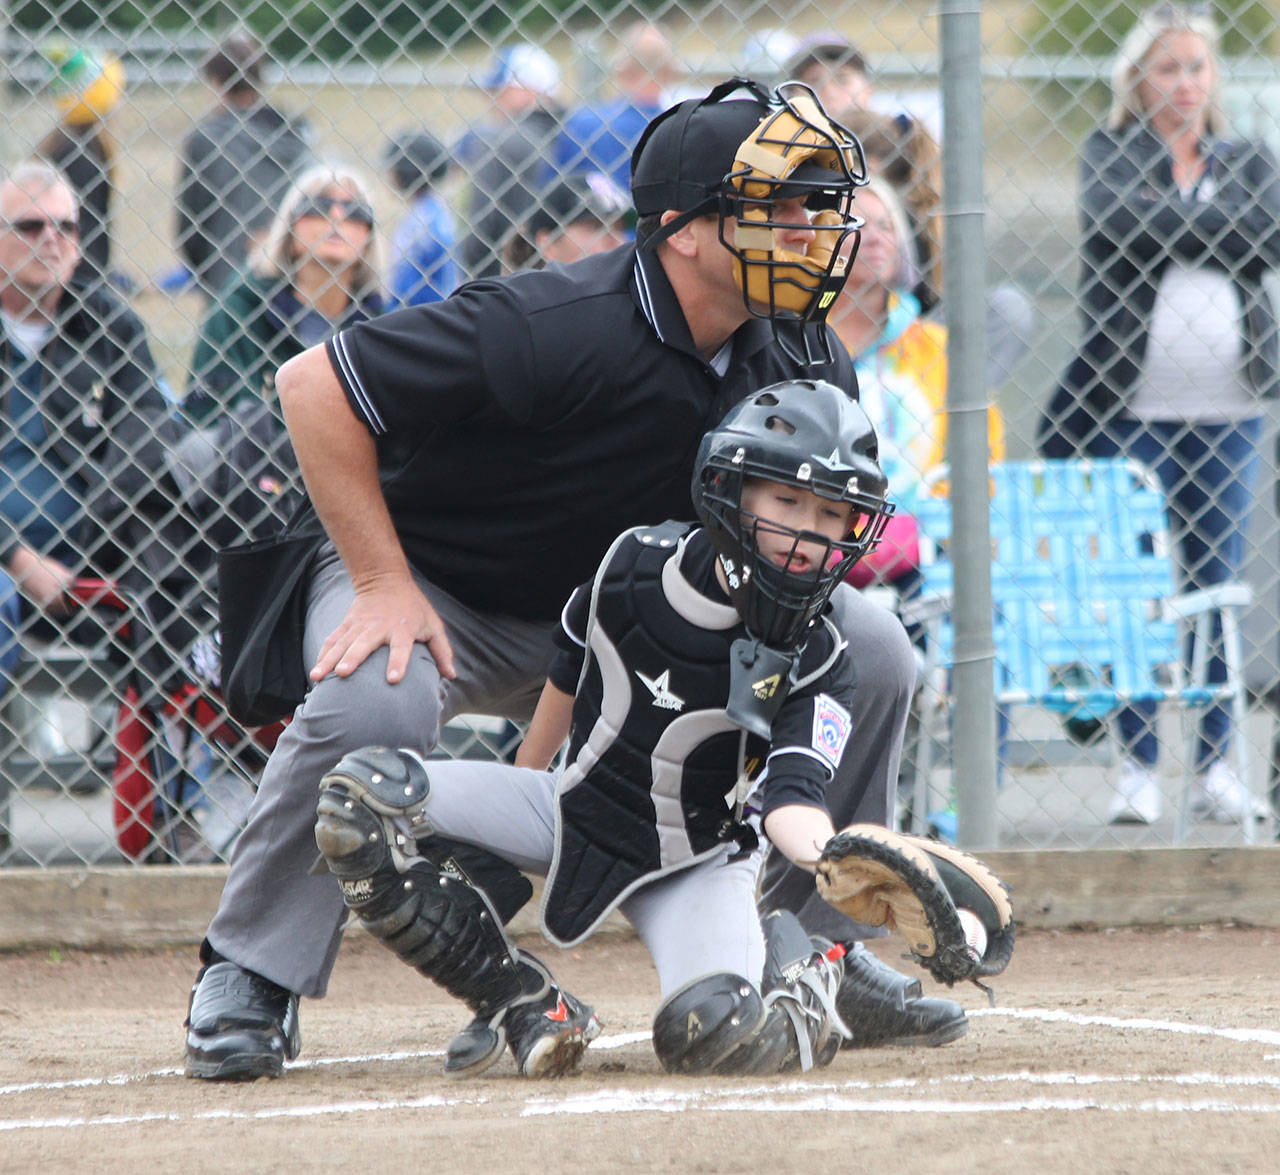 Catcher Jack Ferrell snags an outside pitch as umpire Jim Honold looks on.(Photo by Jim Waller/Whidbey News-Times)